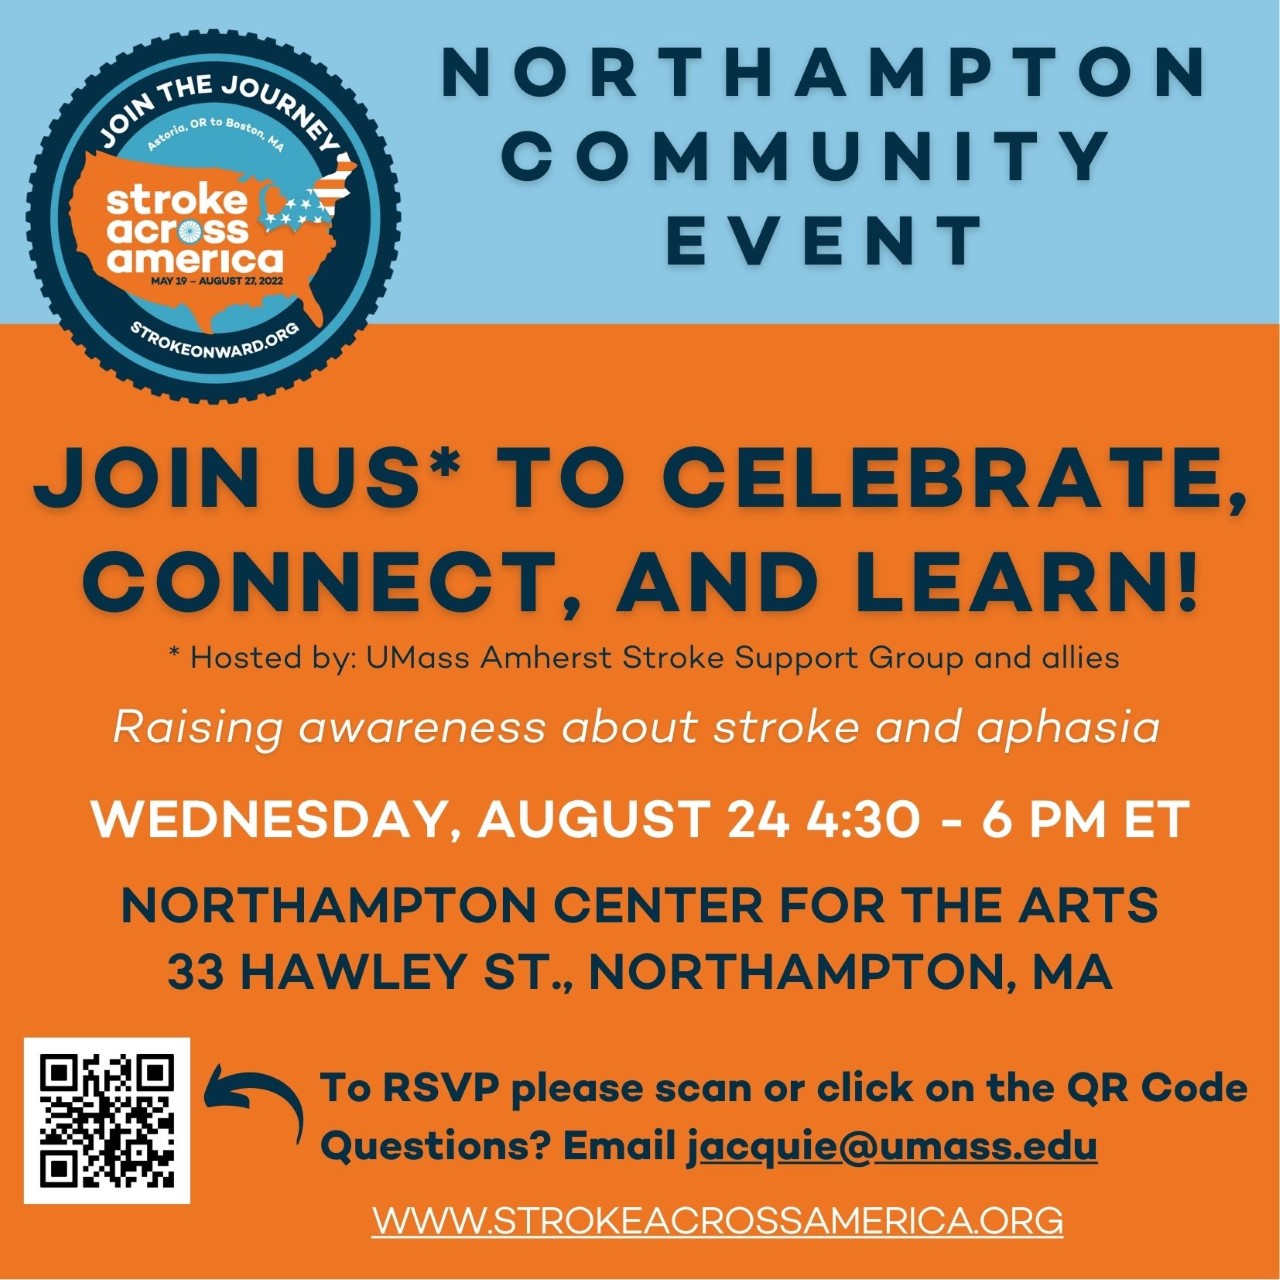 Northampton Community Event: Join us to celebrate, connect and Learn! Raising awareness about stroke and aphasia, Wednesdays, August 24, 4:30pm - 6:00pm, Northampton Center for the Arts, 33 Hawley St., Northampton